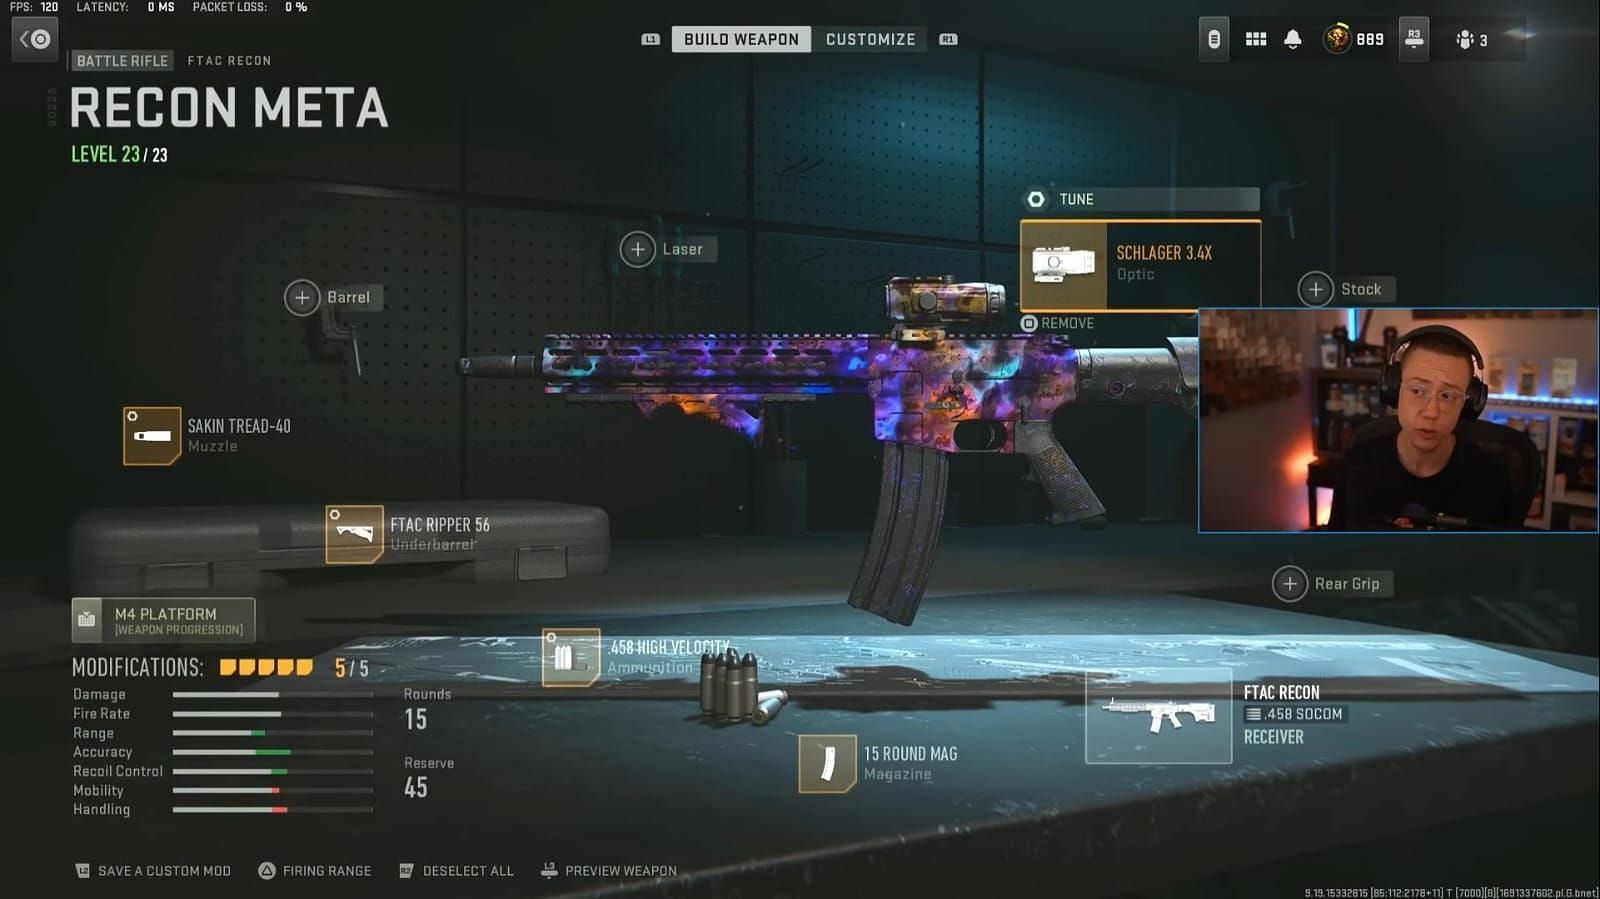 FTAC Recon TTK loadout in Warzone 2 (Image via Activision and YouTube/WhosImmortal)